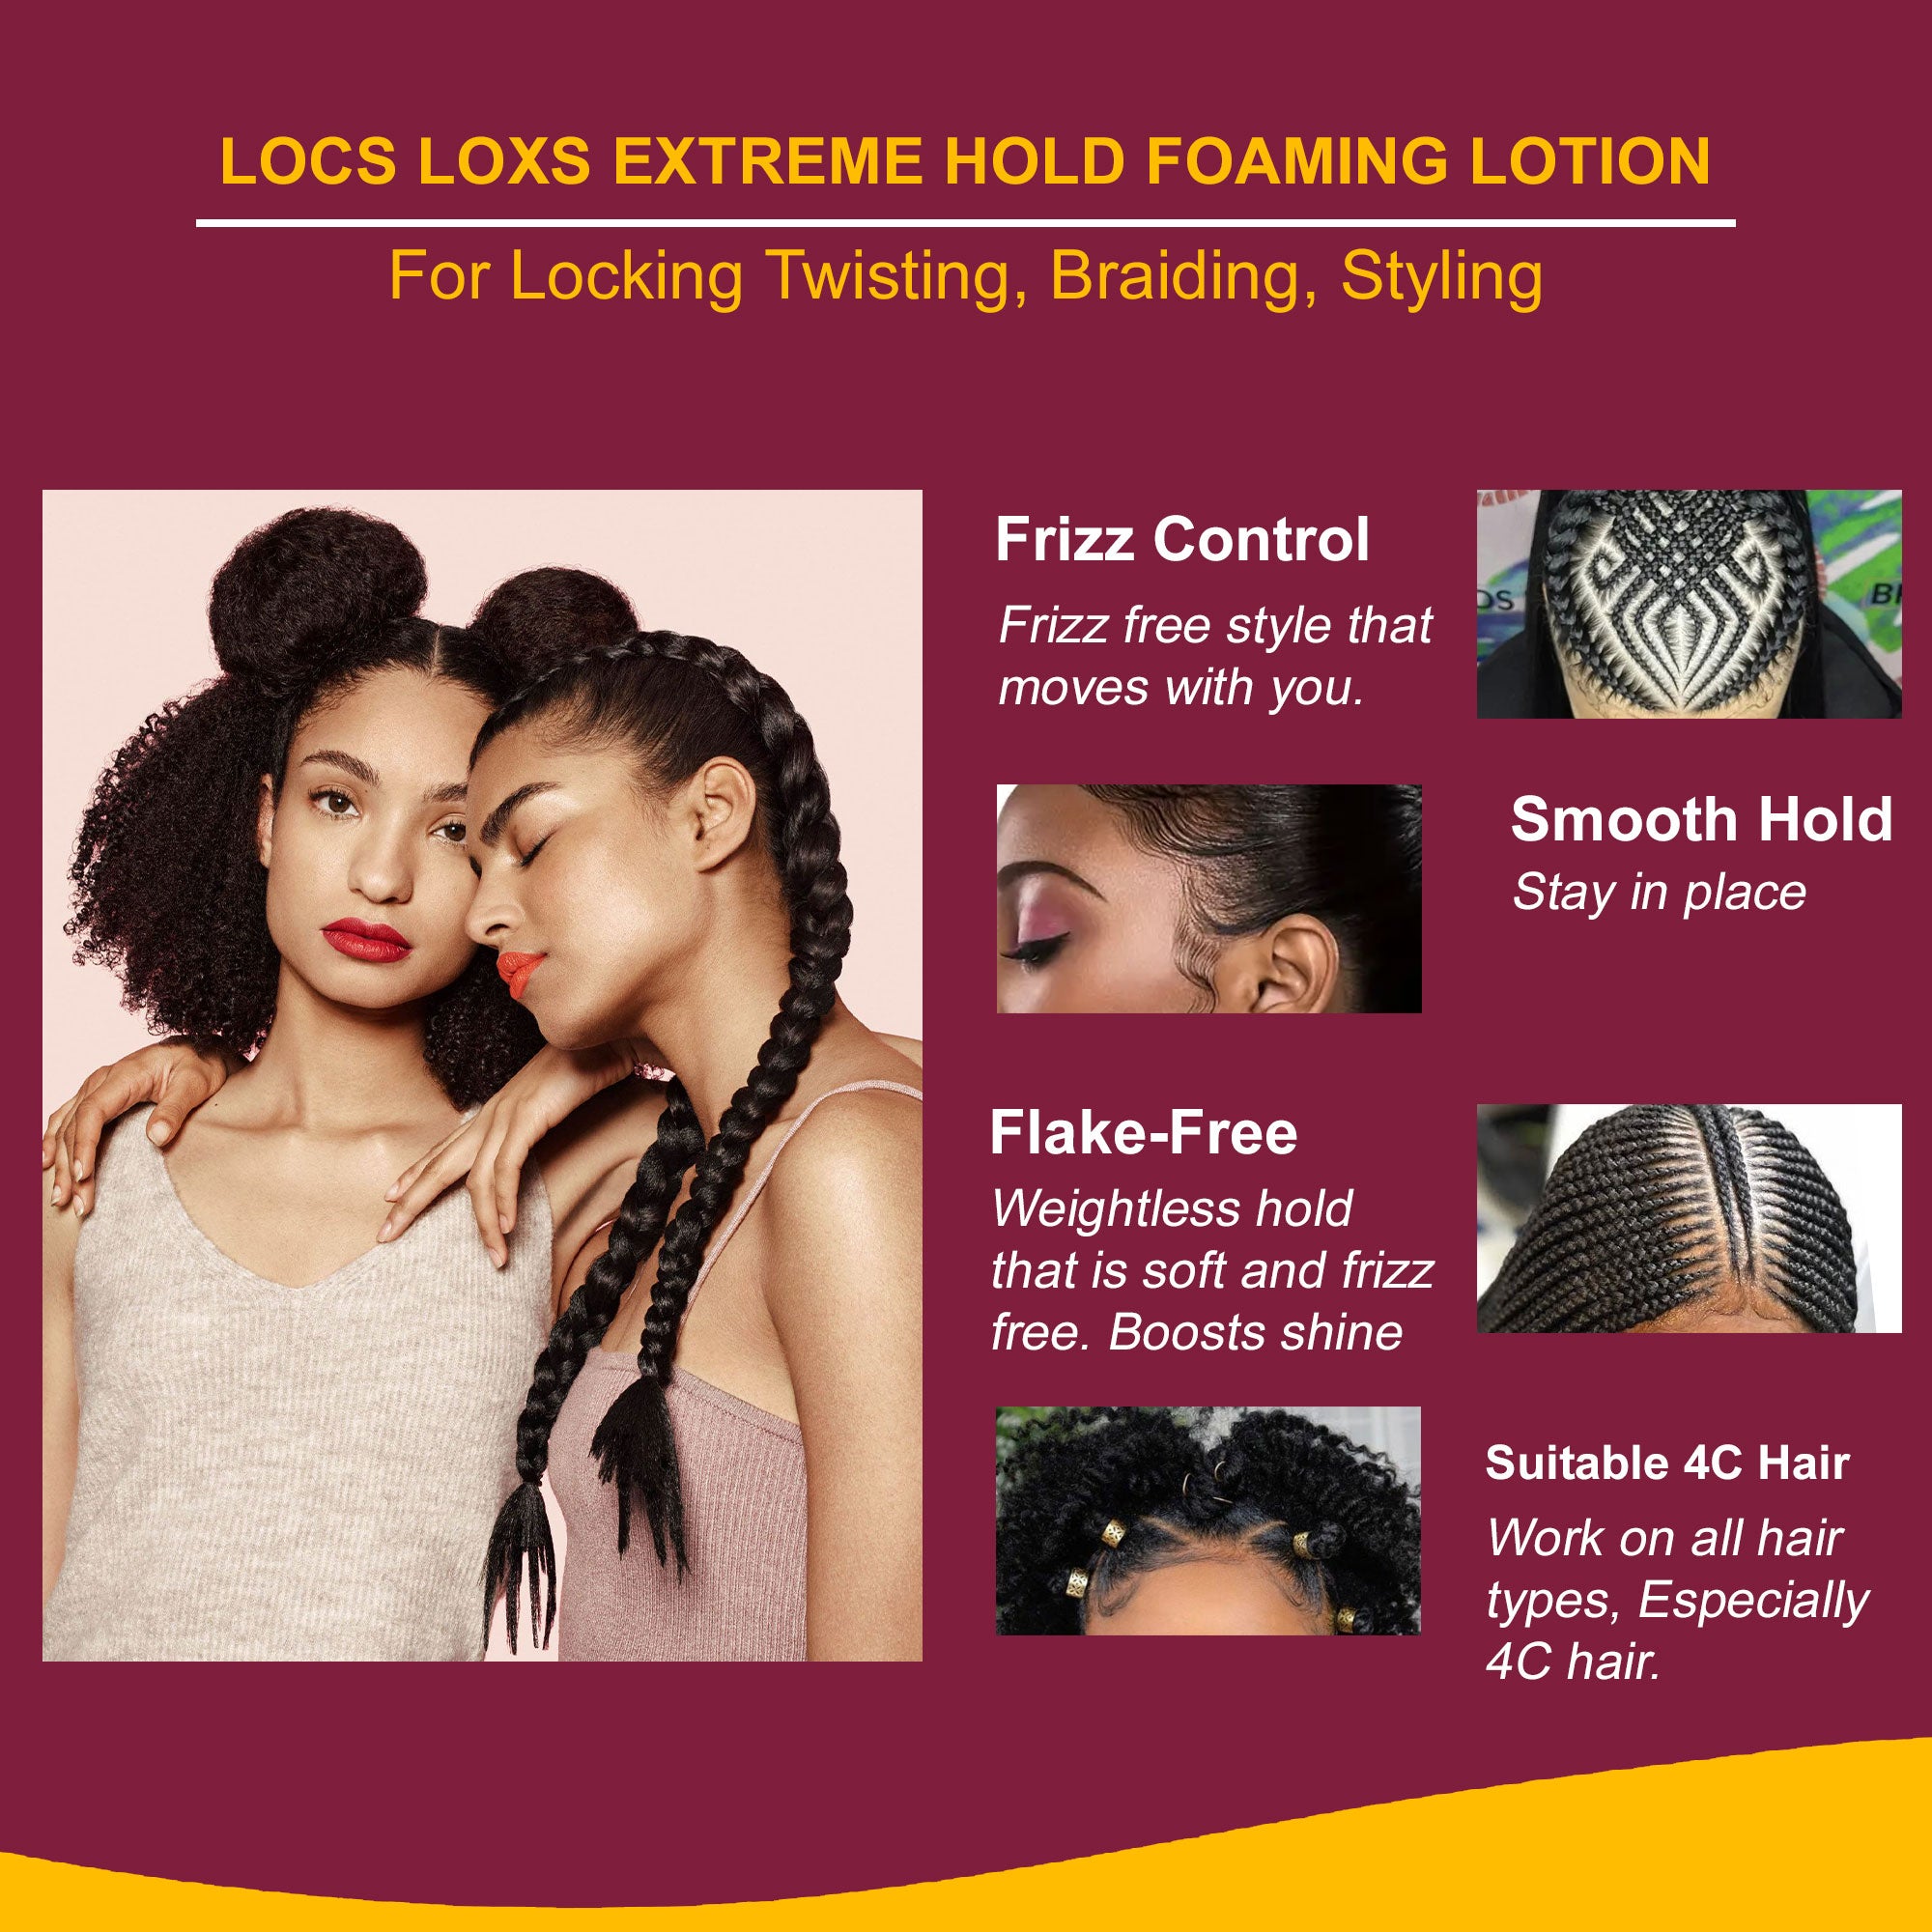 STYLO Locs Loxs Super Hold Hair Gel &amp; Styling Foaming Lotion Extreme Hold (Pack of 2)